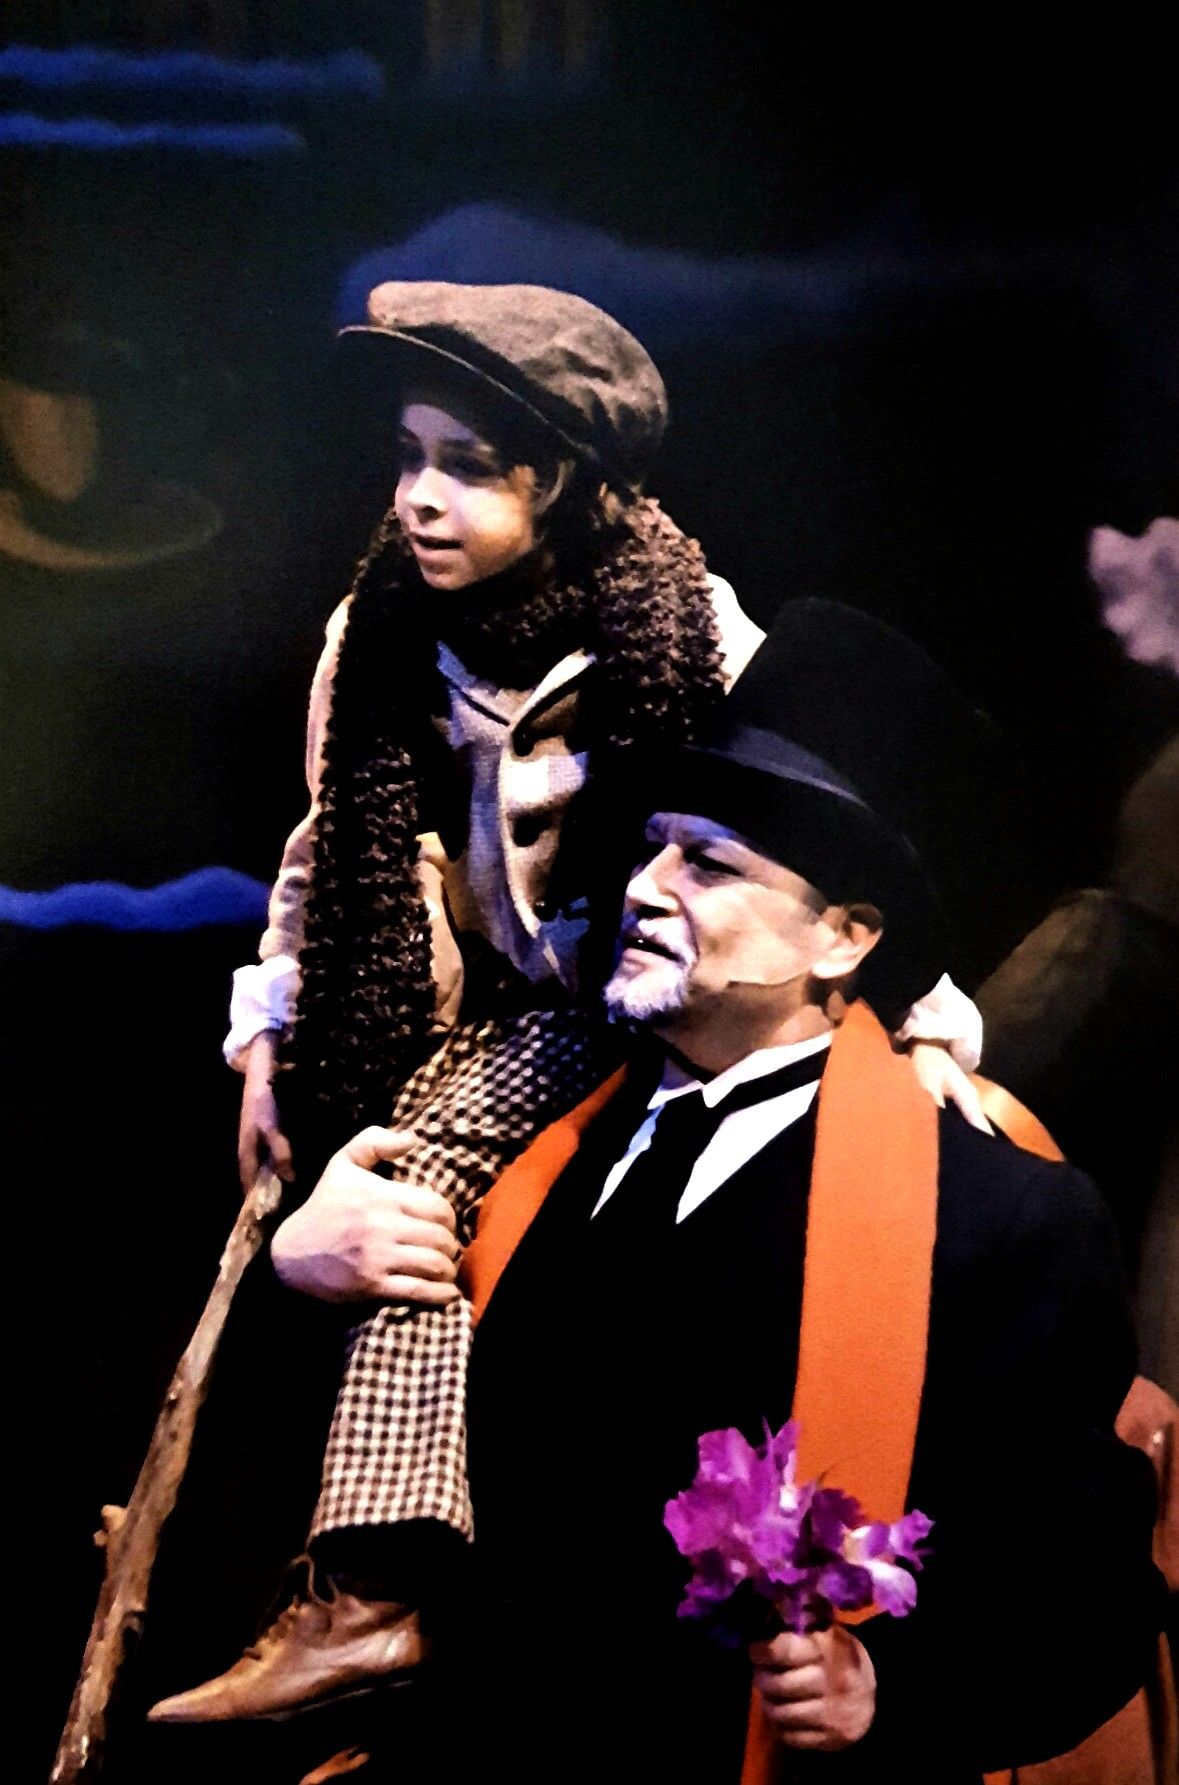 Philip Paul Kelly as "Ebenezer Scrooge" carrying "Tiny Tim" in " A Christmas Carol."